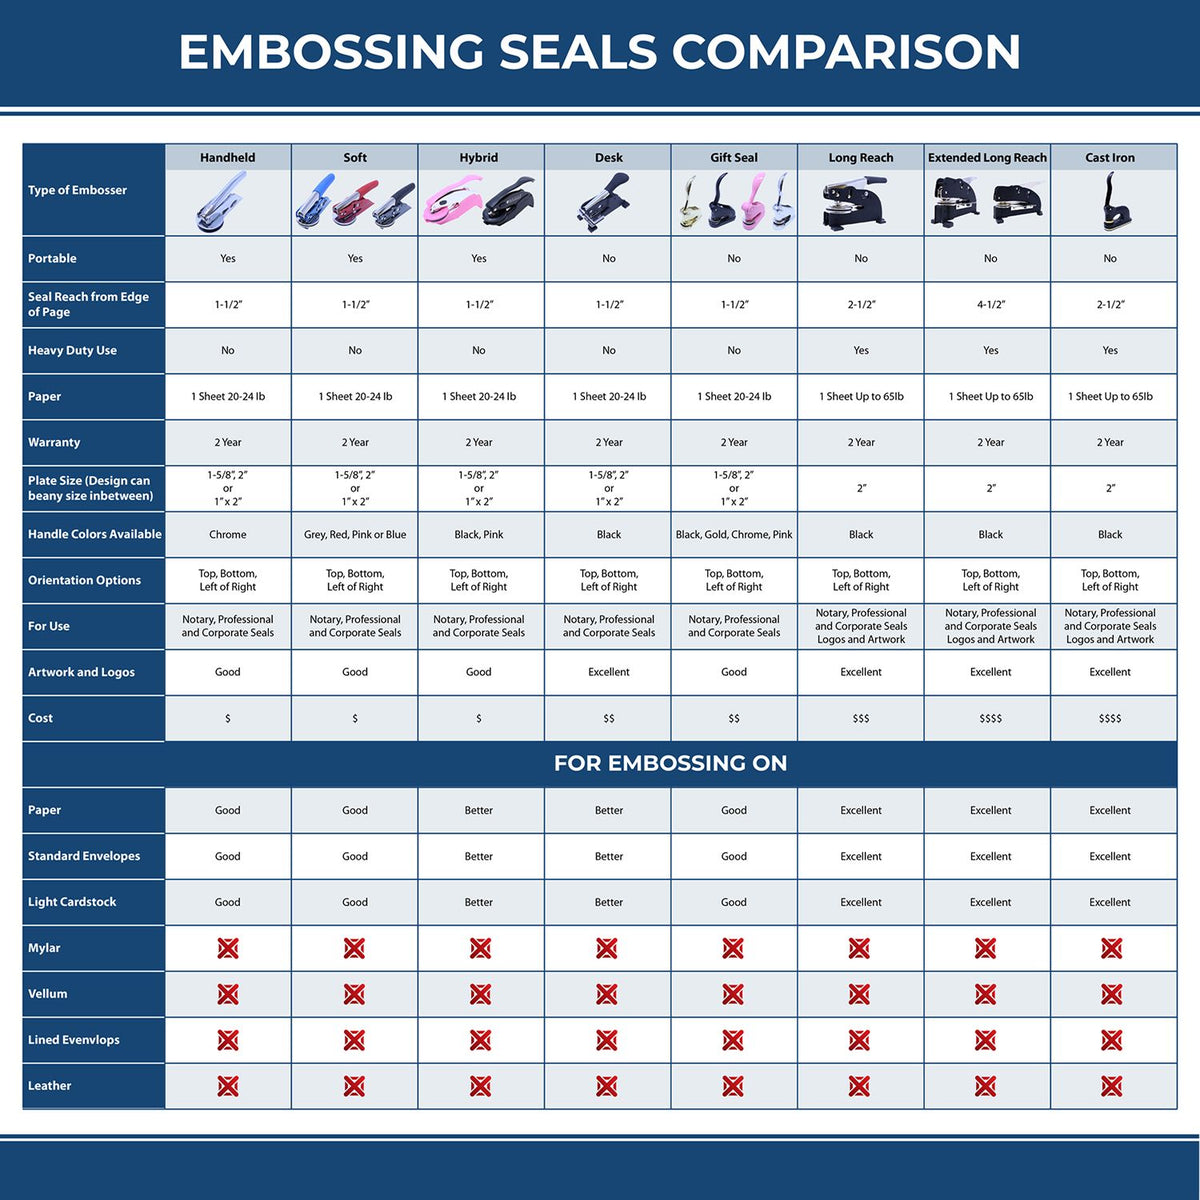 A comparison chart for the different types of mount models available for the Hybrid Washington Engineer Seal